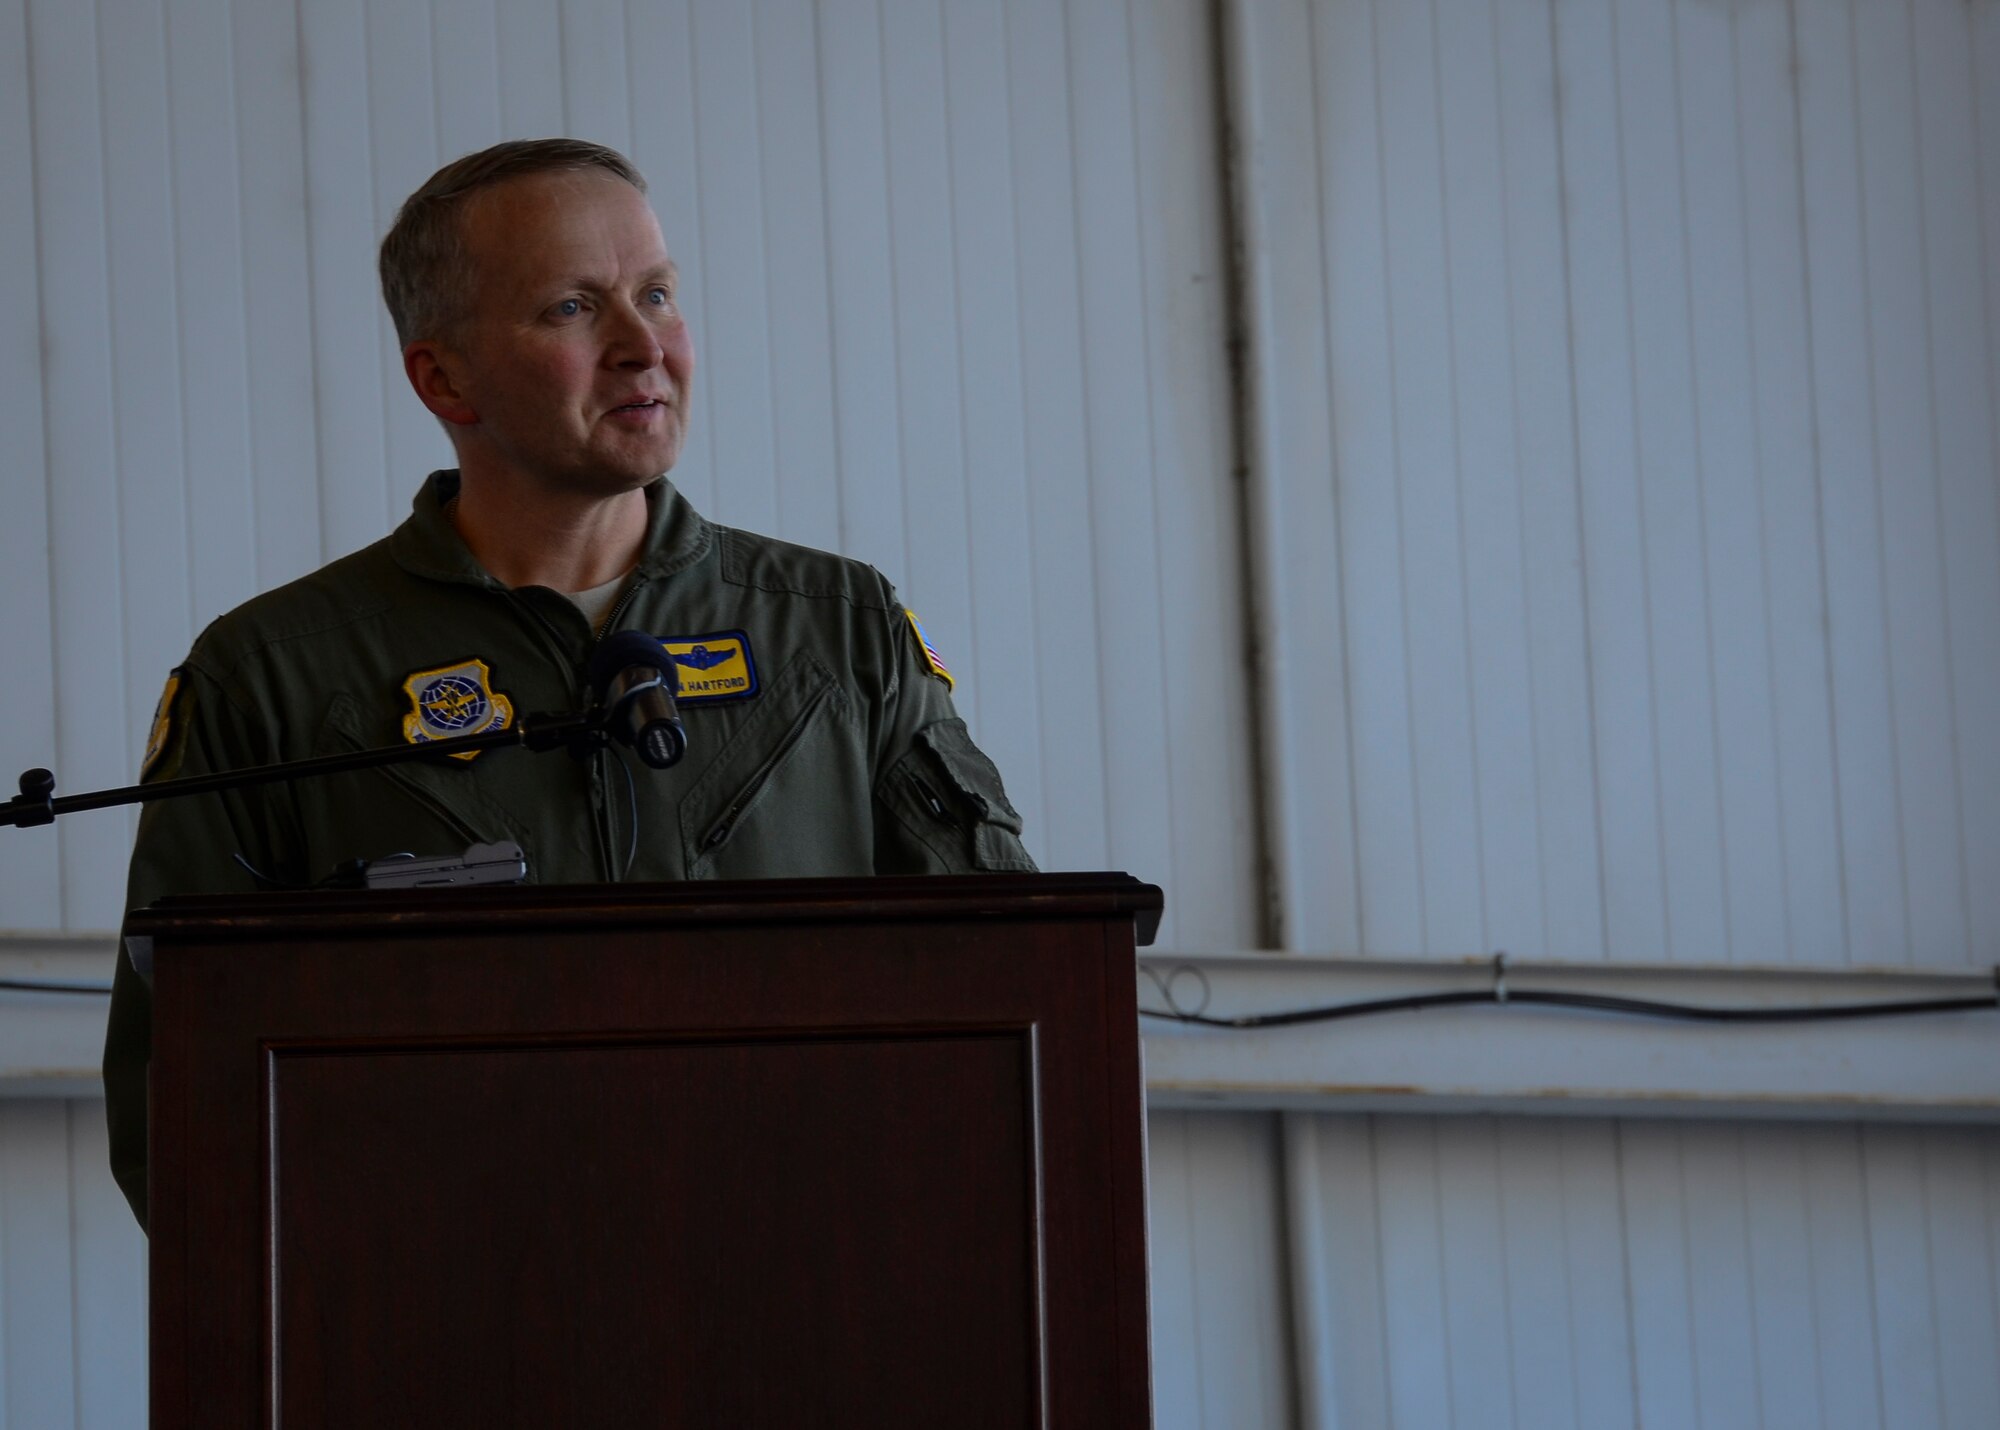 Col. Darren Hartford, 437th Airlift Wing commander, speaks during a ceremony held for Aircraft 9192’s 20,000 Flight Hours, December 18, 2013 at Joint Base Charleston – Air Base, S.C. The aircraft, nicknamed the “Spirit of Charleston” was the first C-17 in the U.S. Air Force’s inventory and has flown missions throughout the world for more than two decades. Those missions have totaled more than 20,000 flight hours. (U.S. Air Force photo/Staff Sgt. Anthony Hyatt)